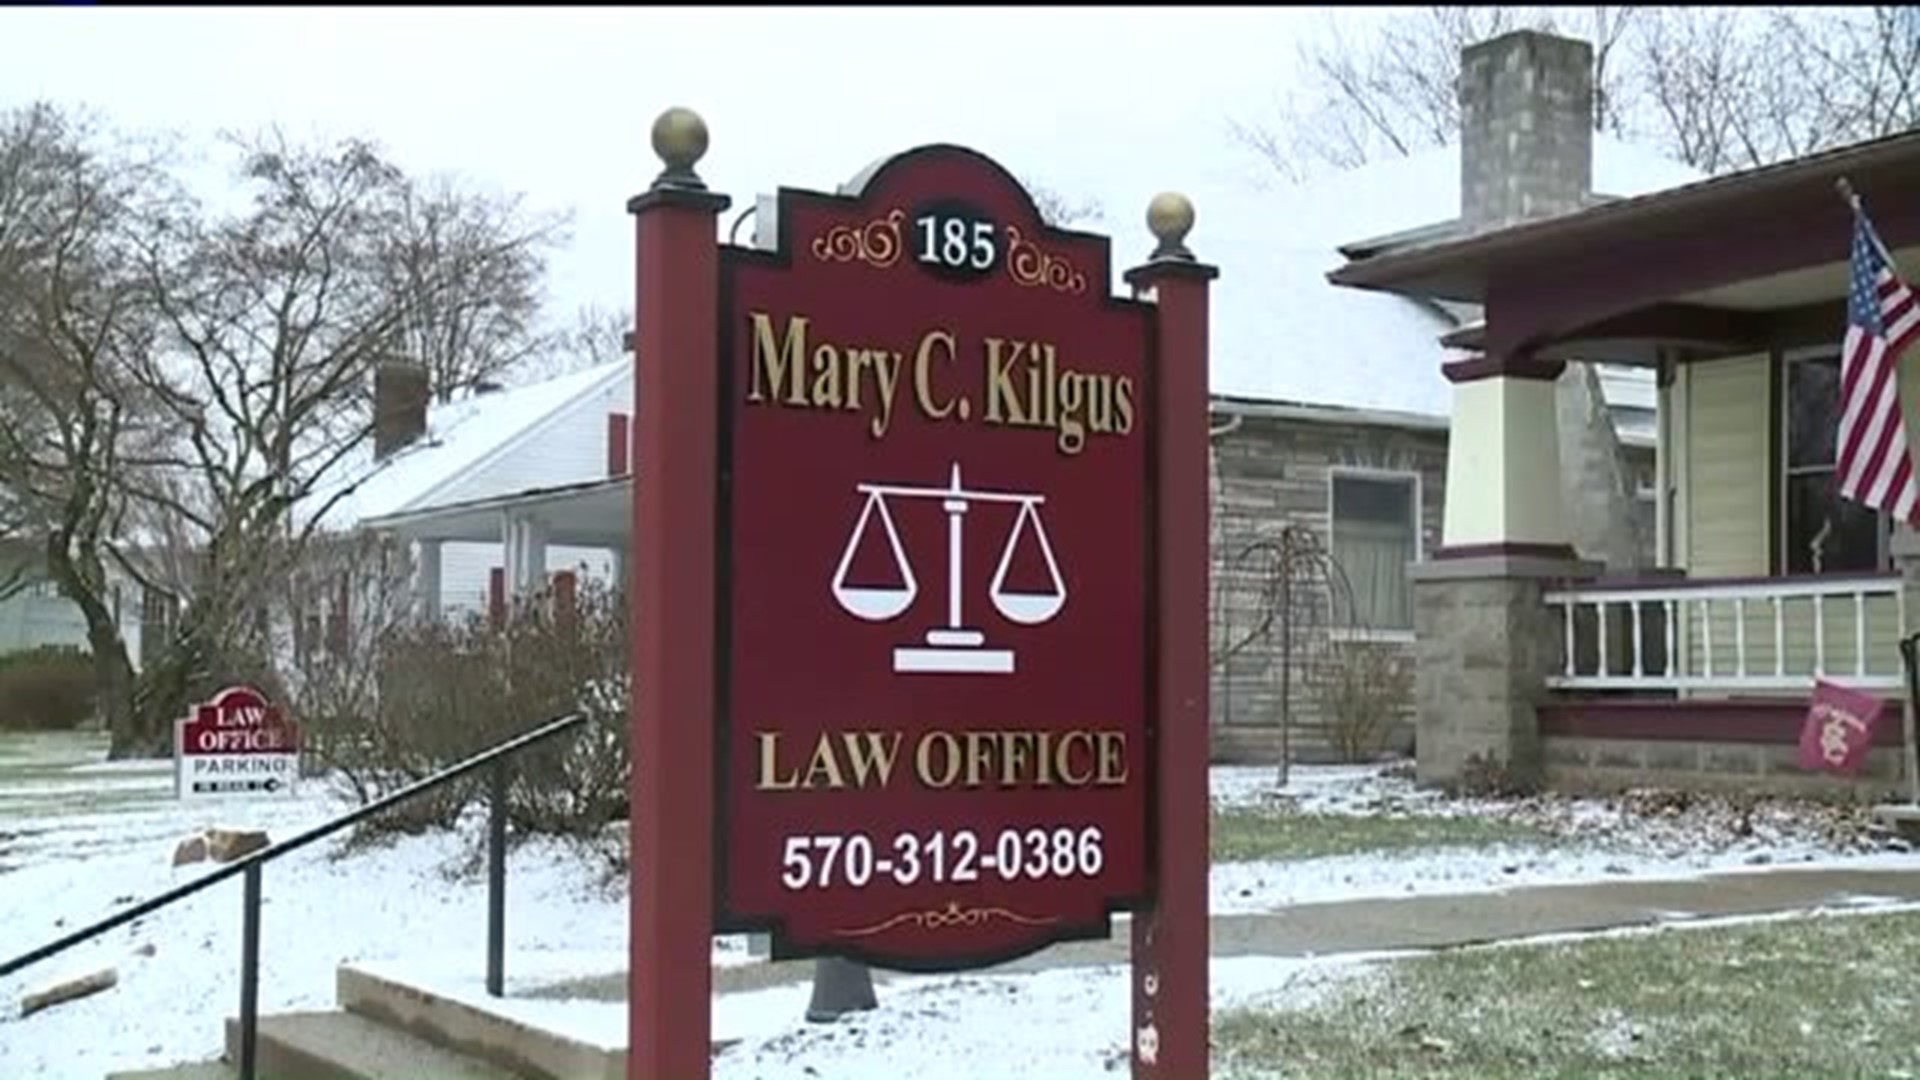 Search Warrant Executed at Law Office in Lycoming County